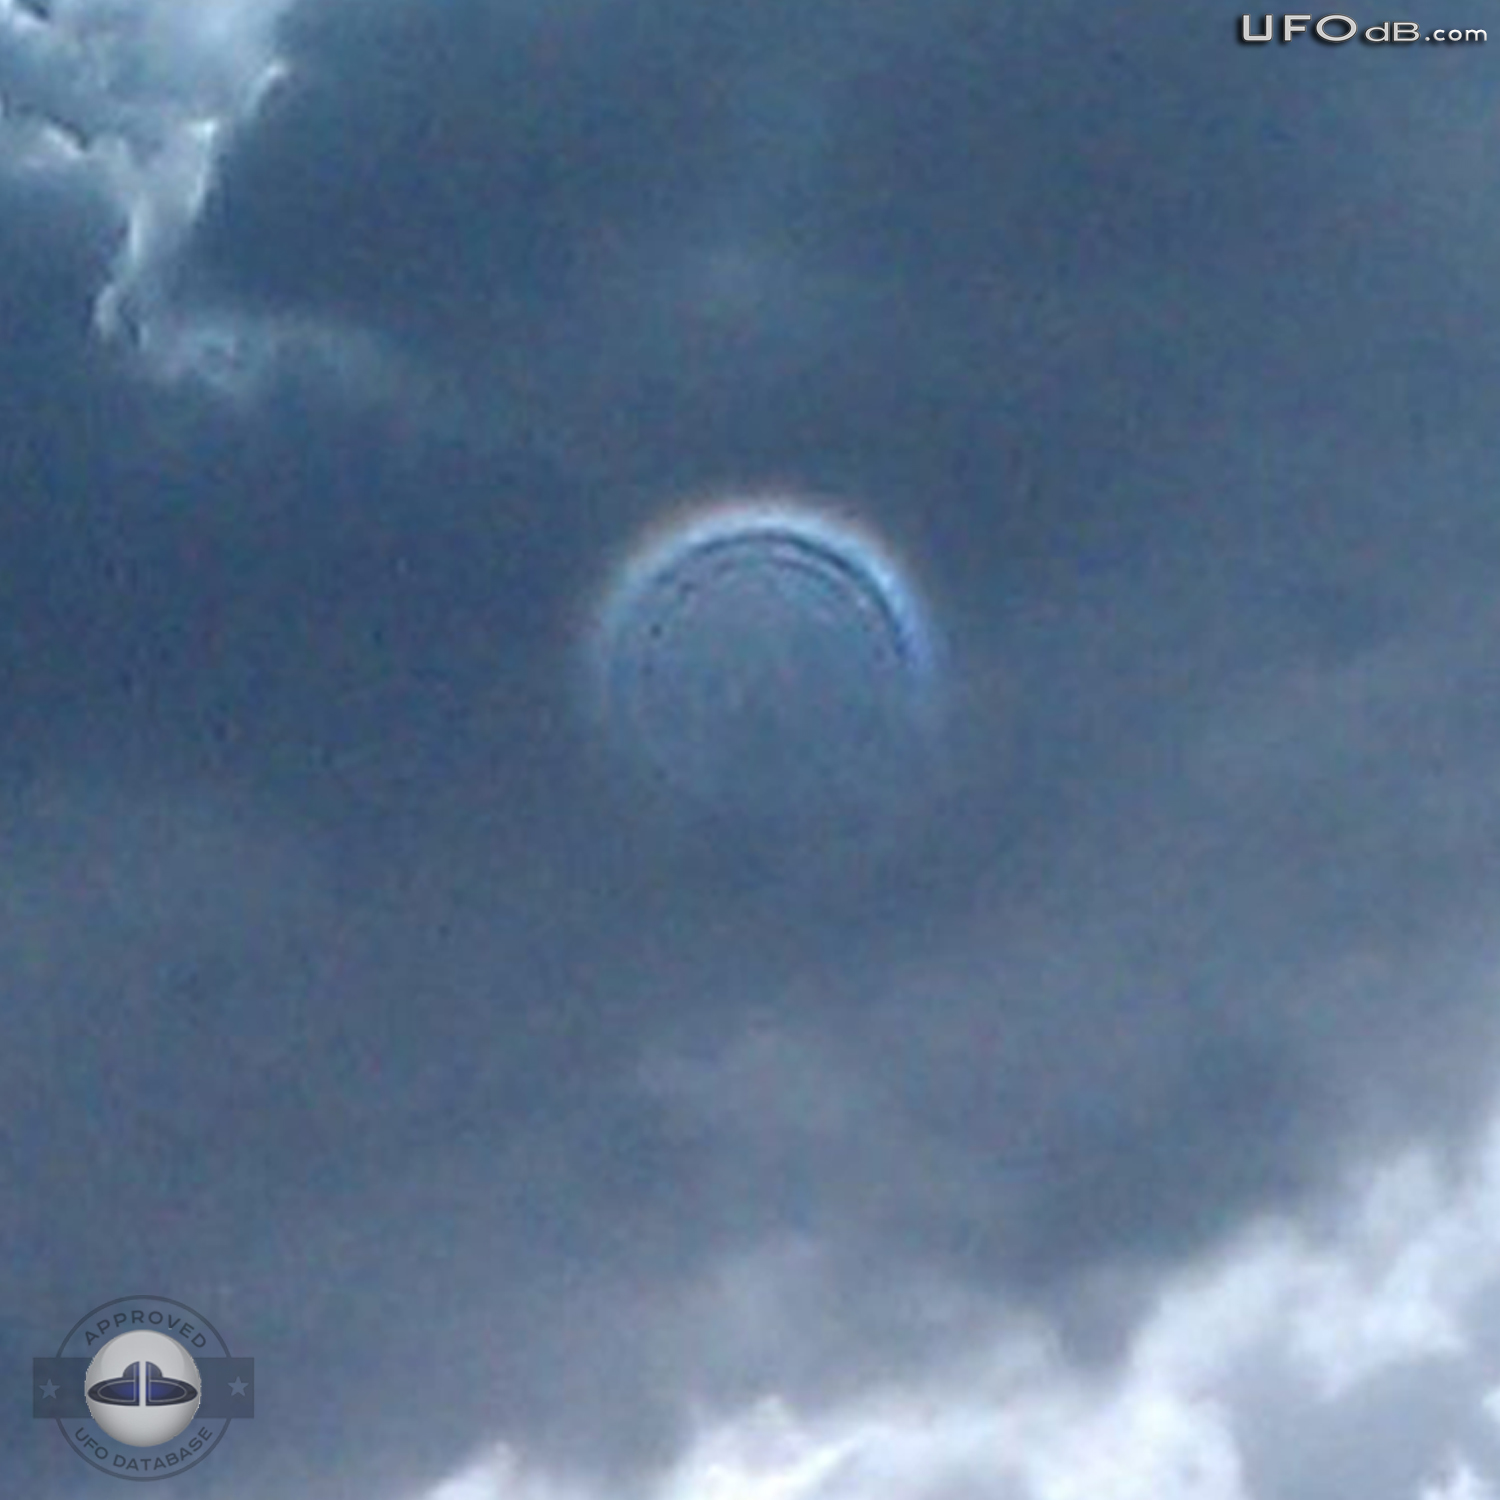 Large UFO coming through a Cloud in Las Vegas Nevada USA | May 13 2011 UFO Picture #334-5